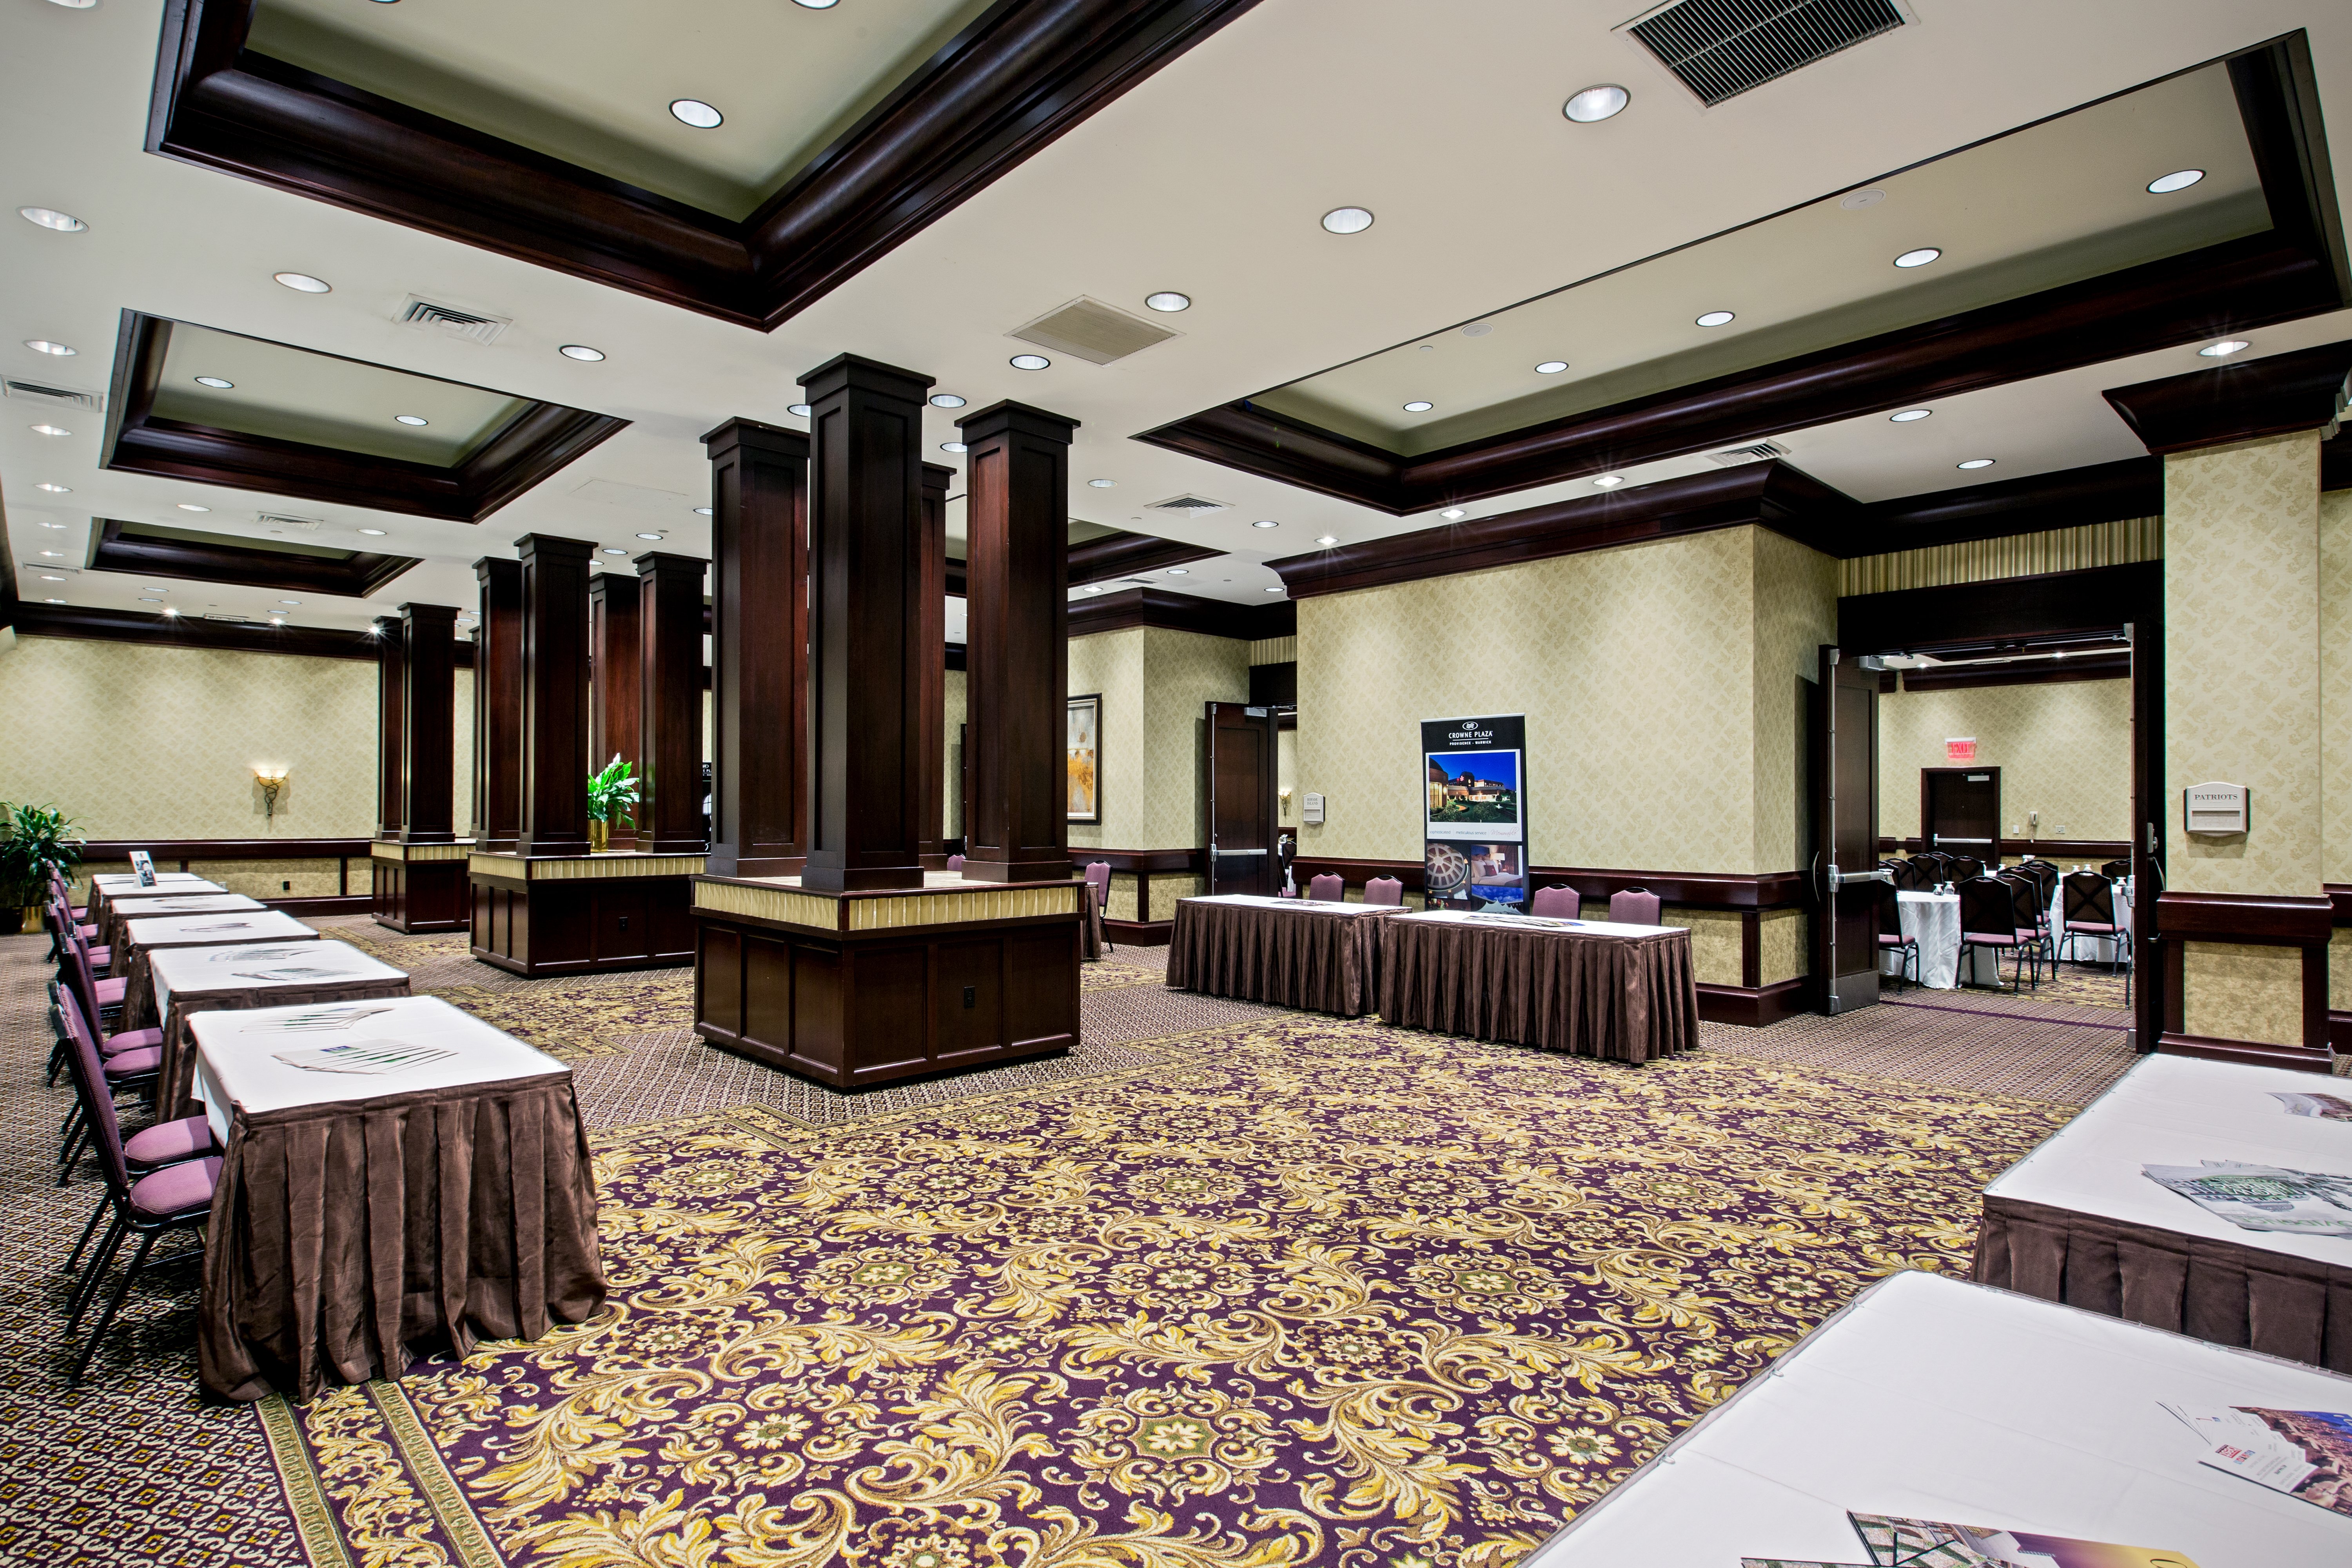 Awe-inspiring design and ballroom space for your grand event.